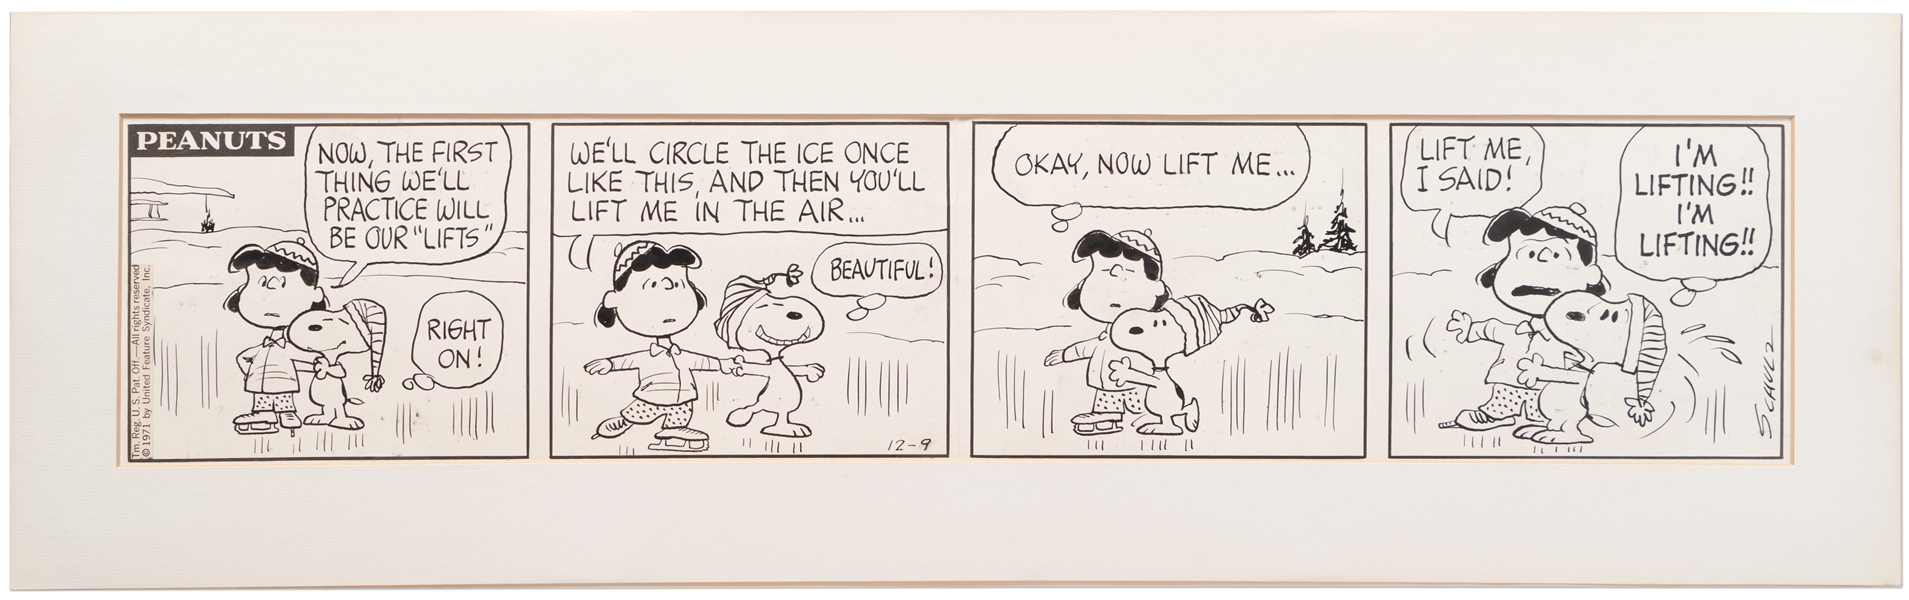 Original Charles Schulz ''Peanuts'' Comic Strip from 1971 -- Snoopy & Lucy Form an Unlikely Ice Skating Duo